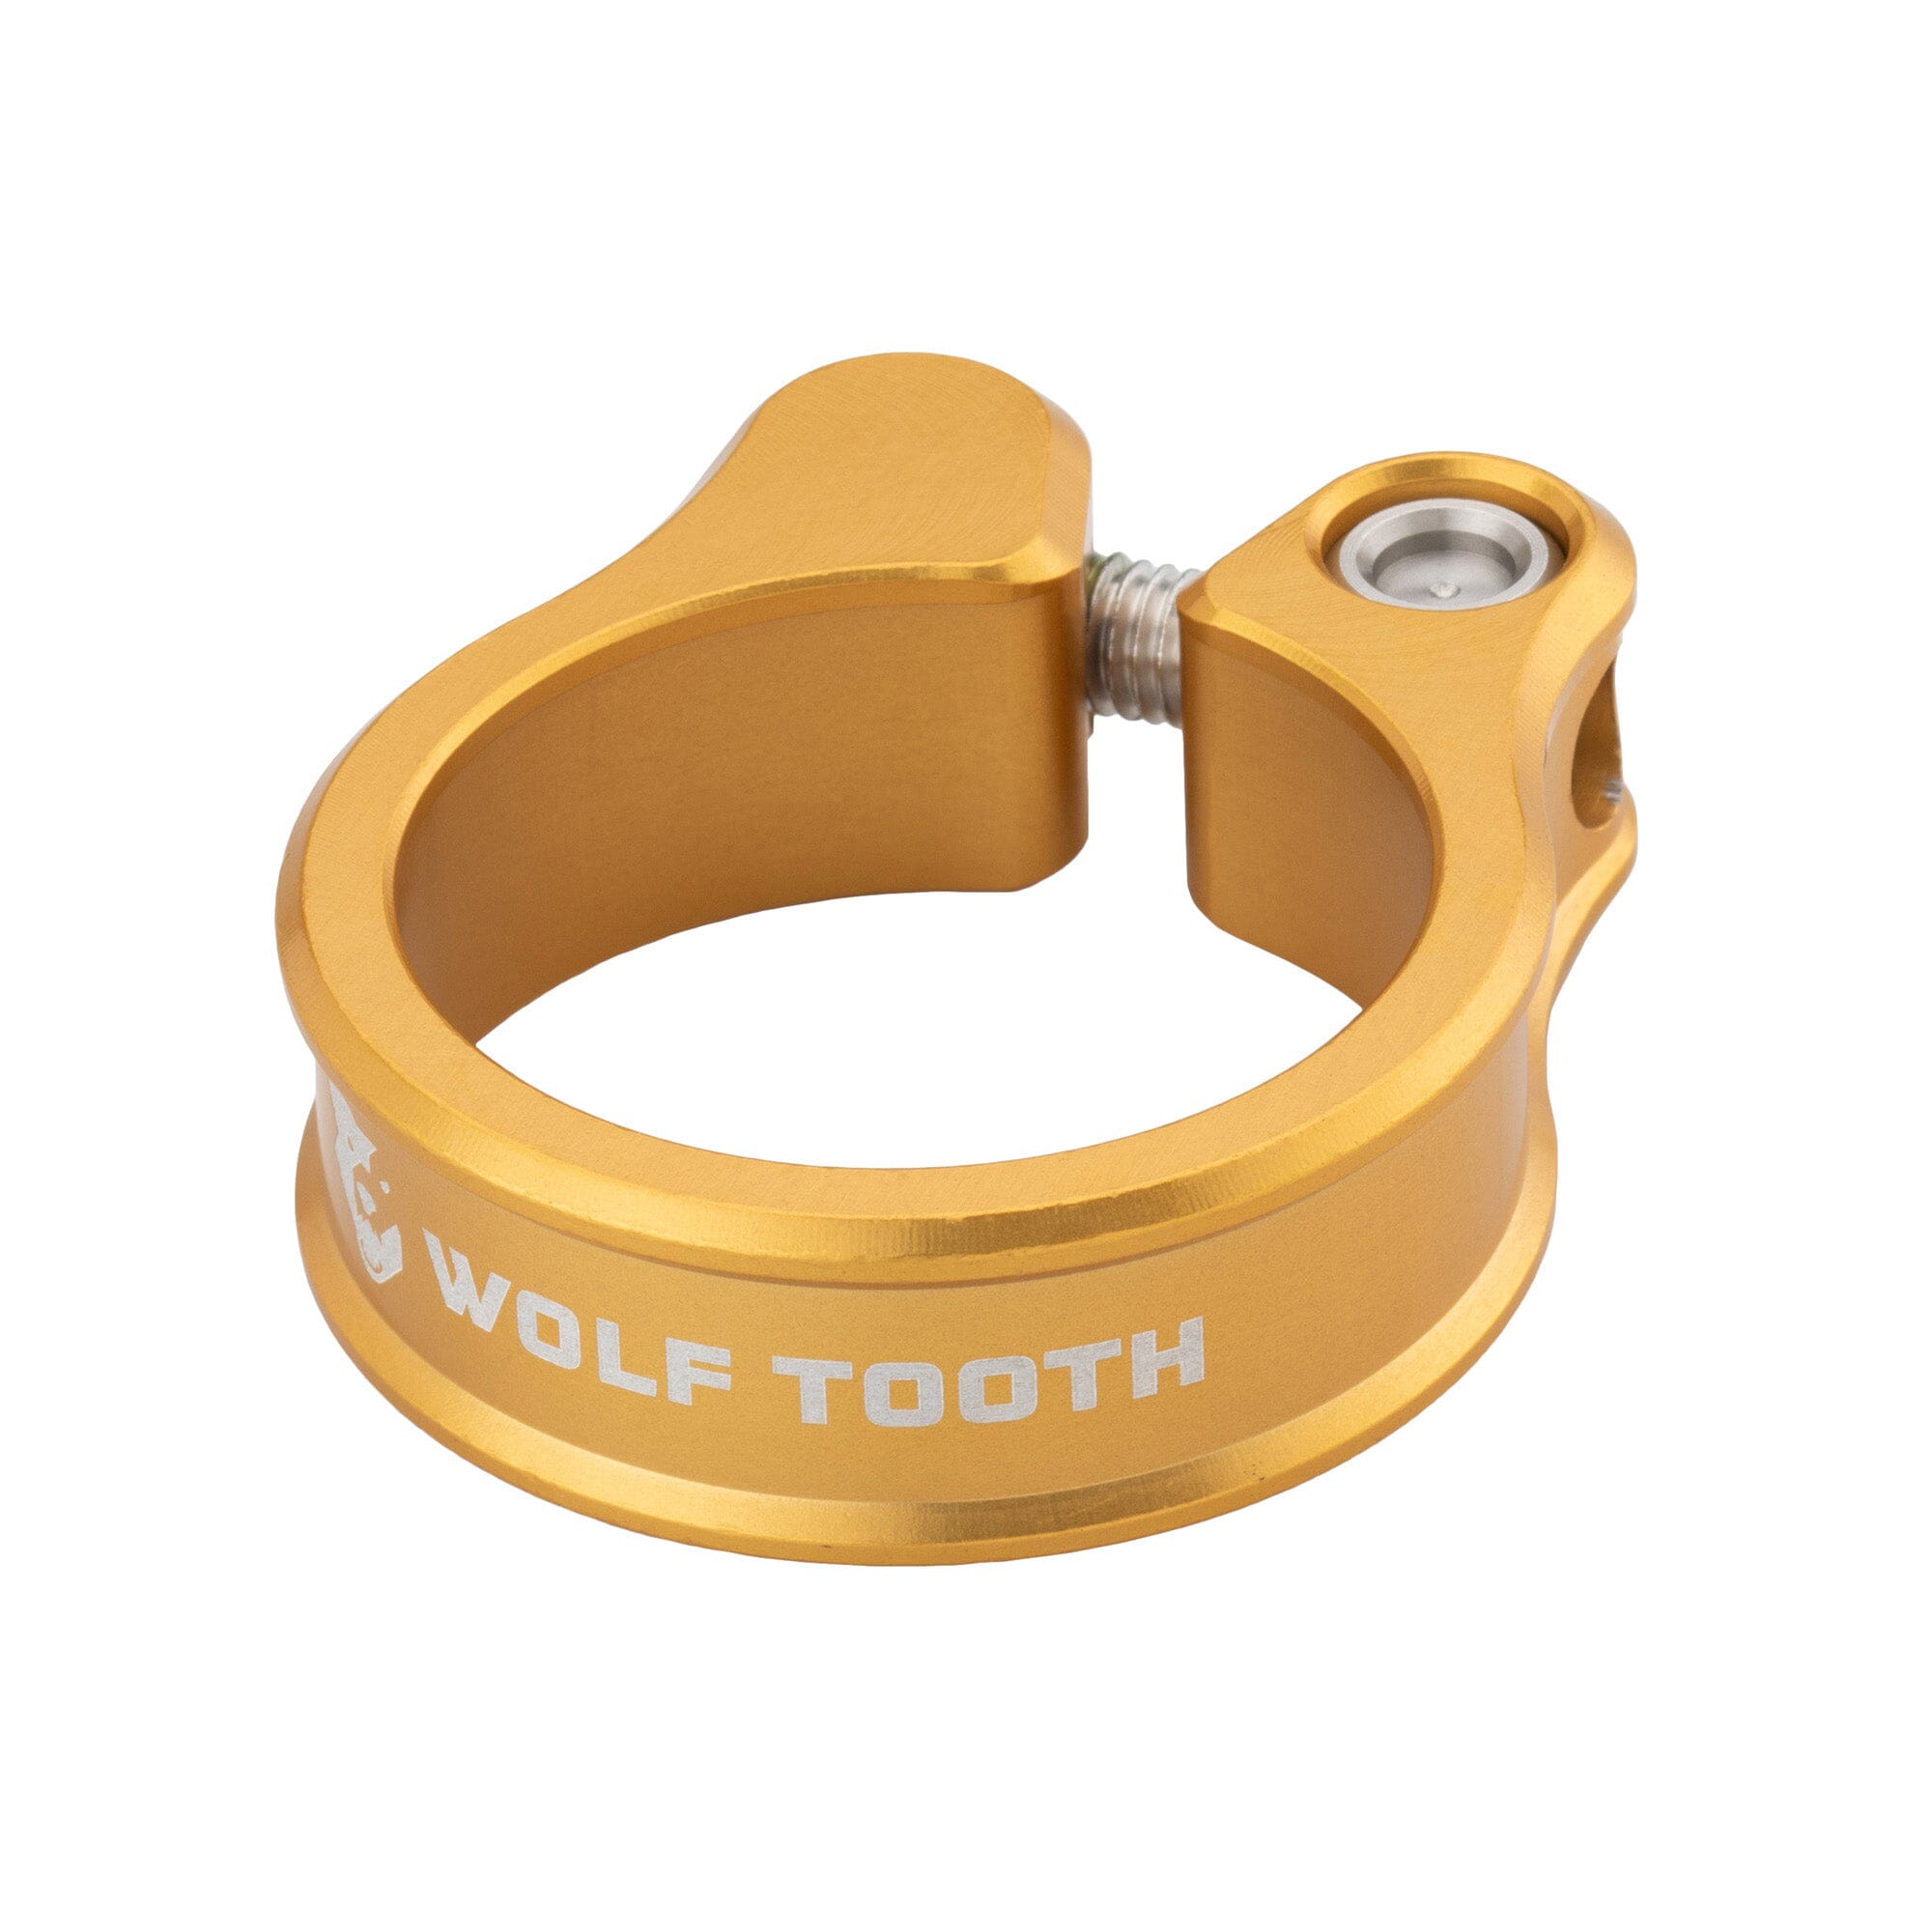 Product image for skus WTSC29GLD, WTSC30GLD, WTSC32GLD, WTSC35GLD, WTSC36GLD, WTSC39GLD